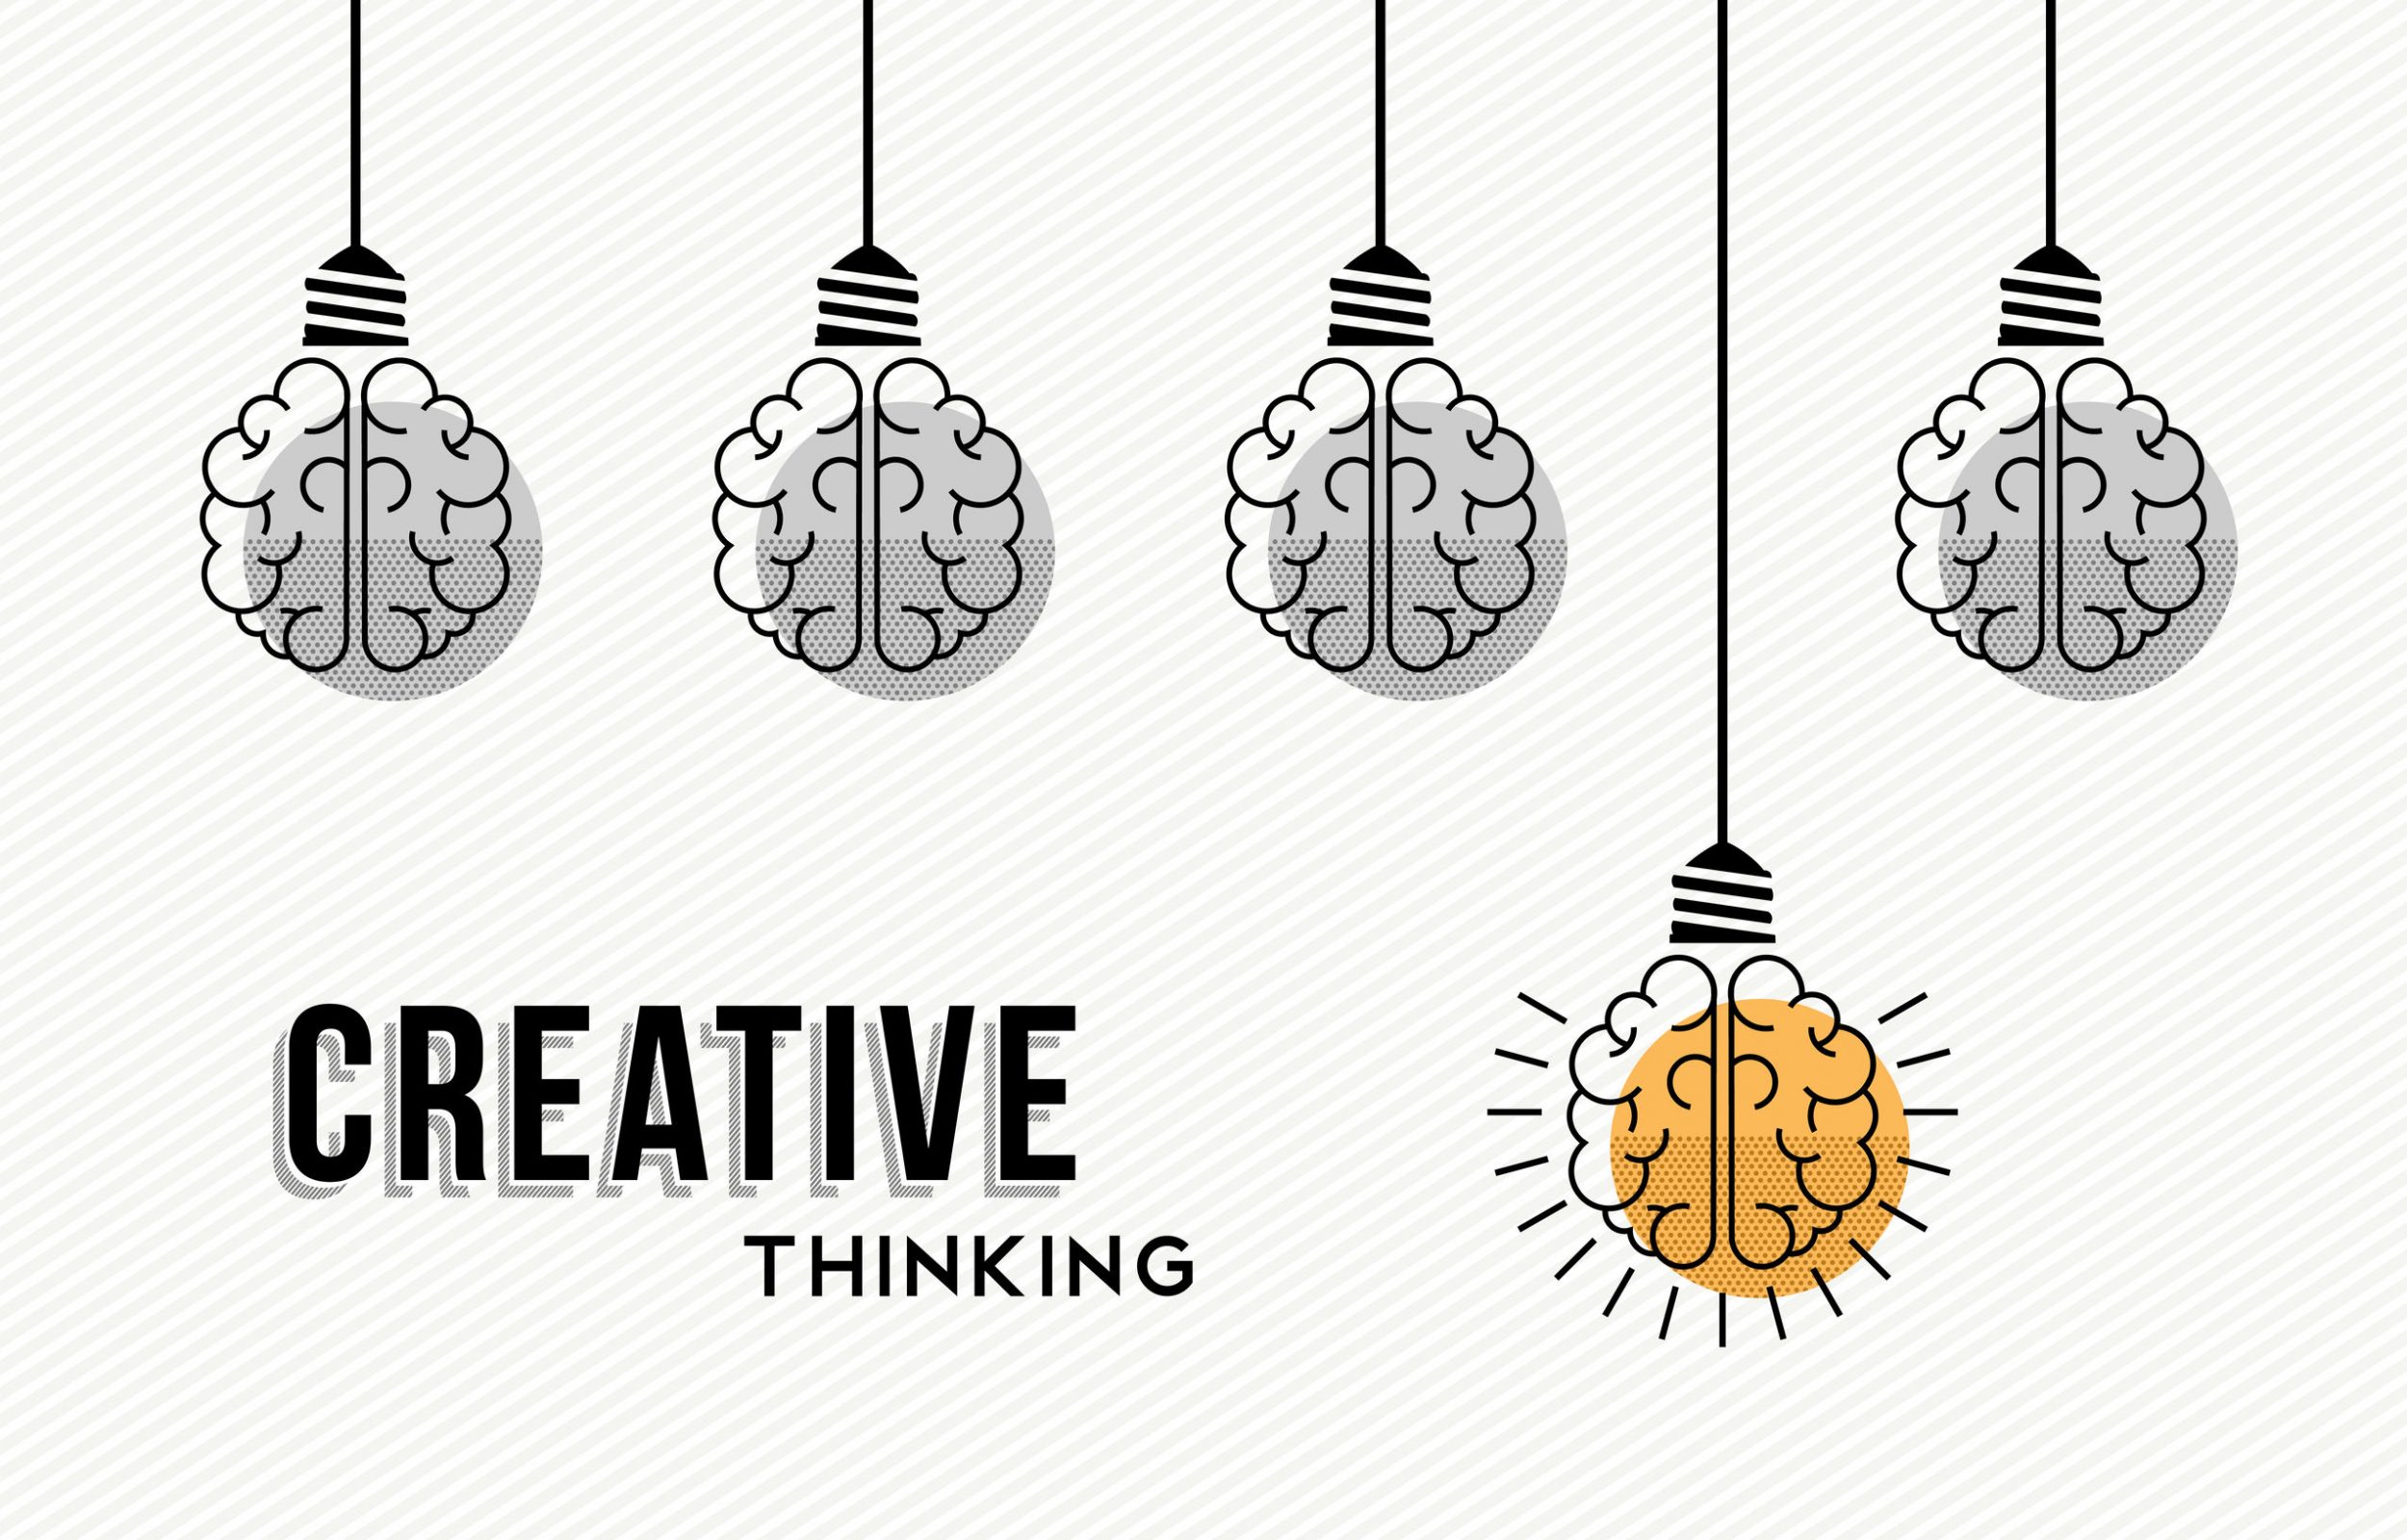 Modern creative thinking concept design, human brains in black and white with colorful one getting an idea. EPS10 vector.